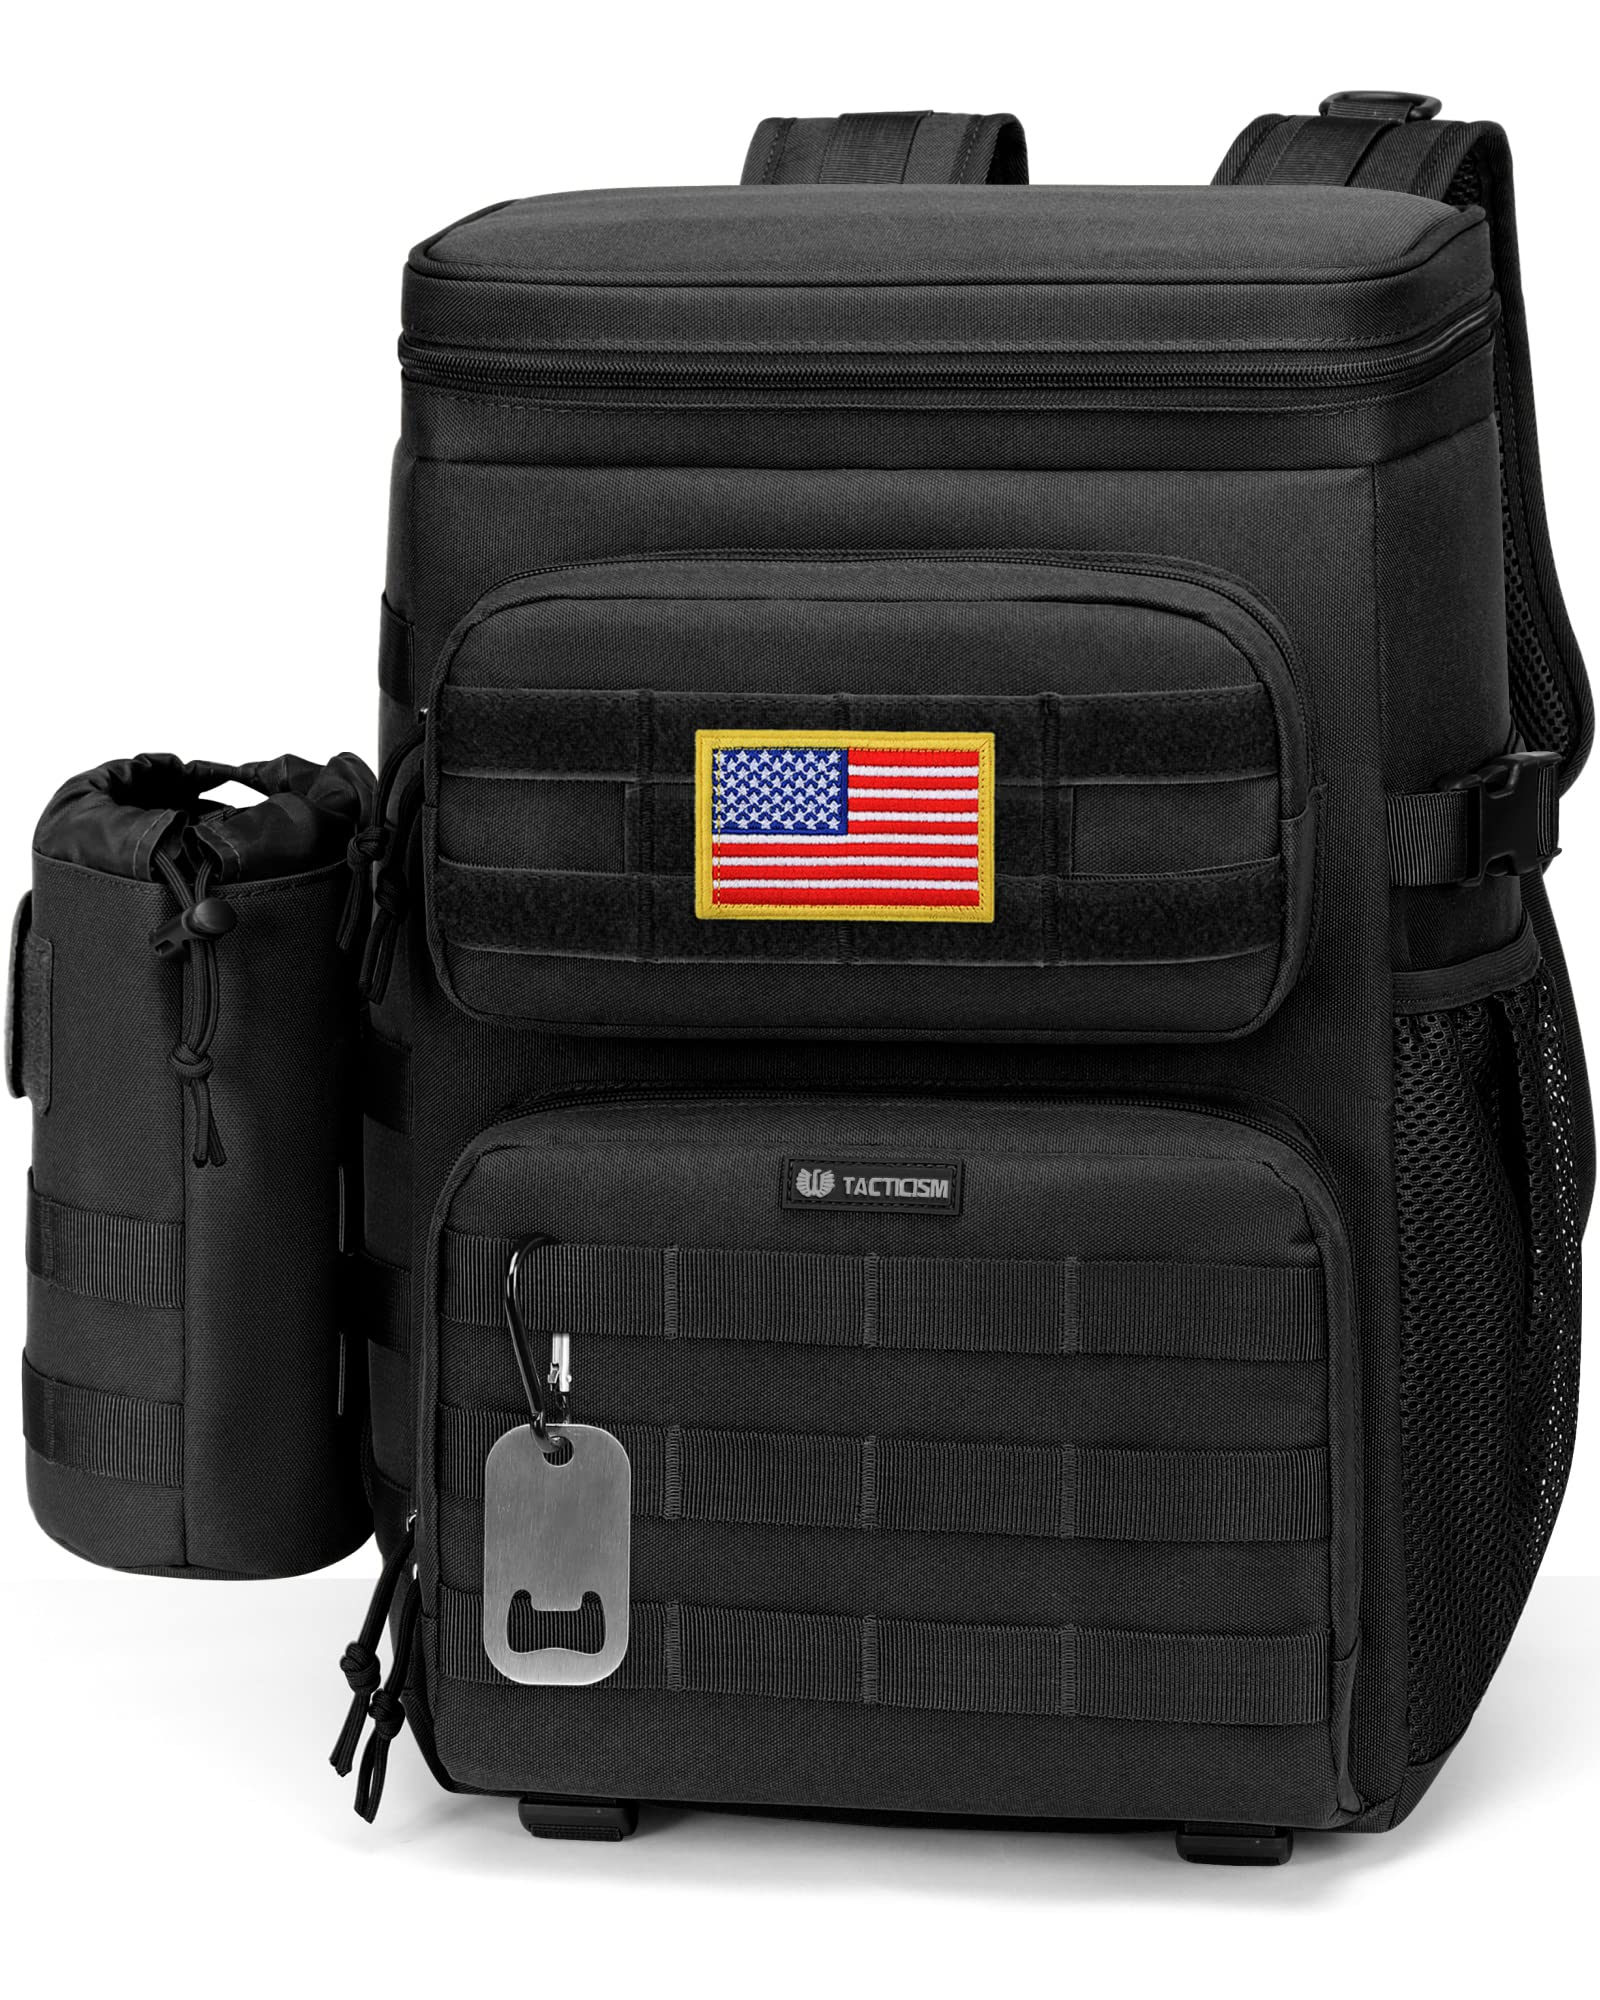 Cool-It' Insulated Cooler Bag